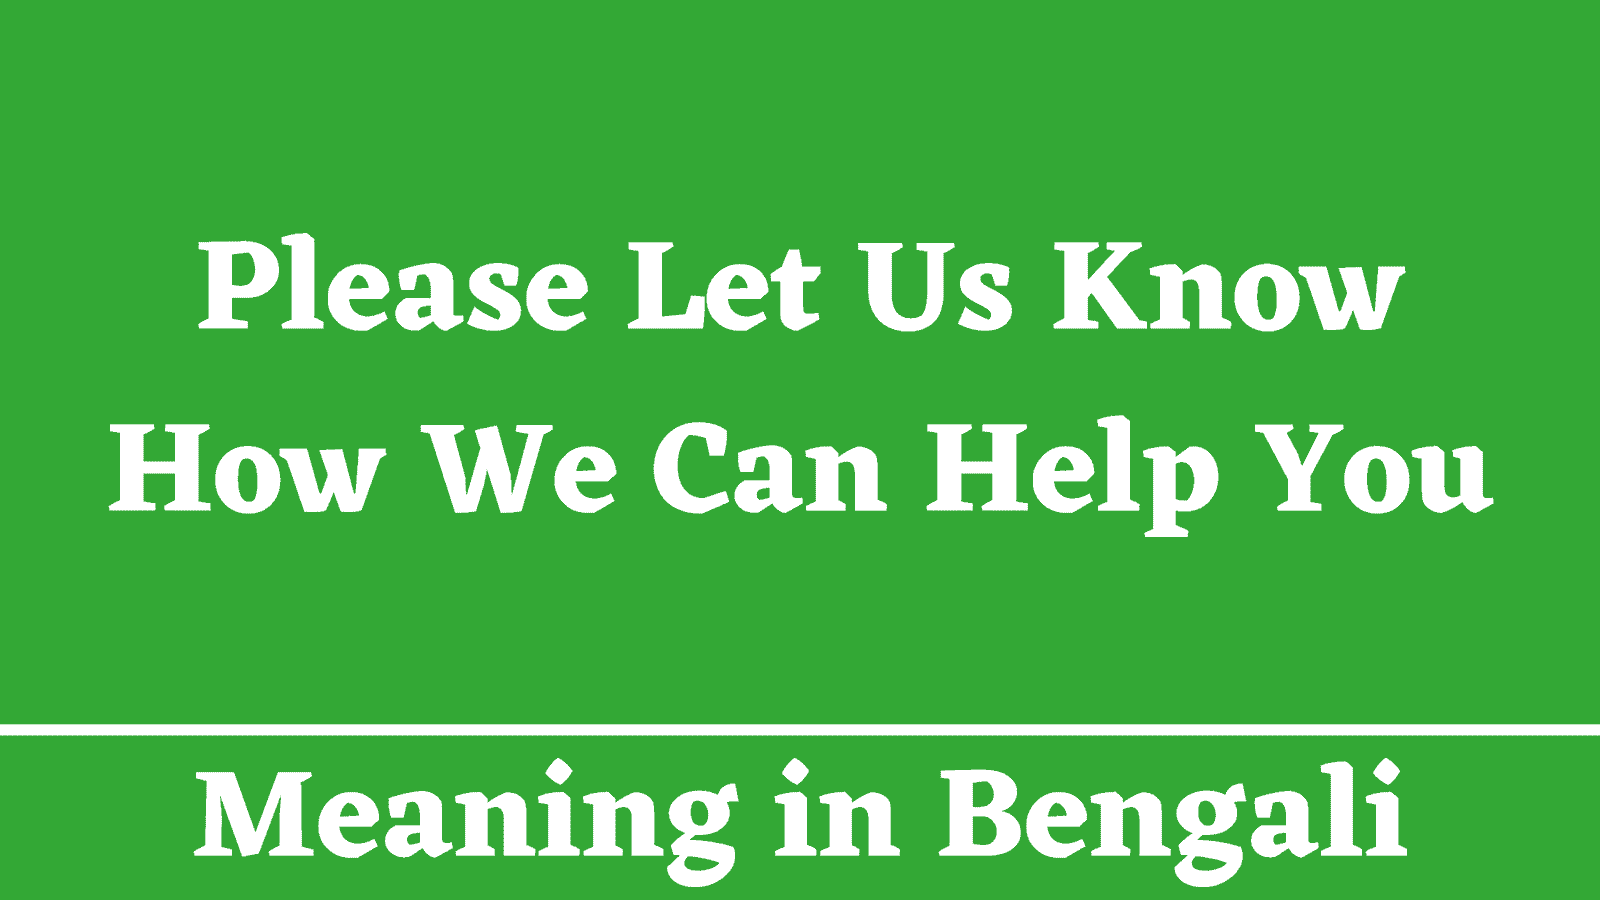 Please Let Us Know How We Can Help You Meaning in Bengali